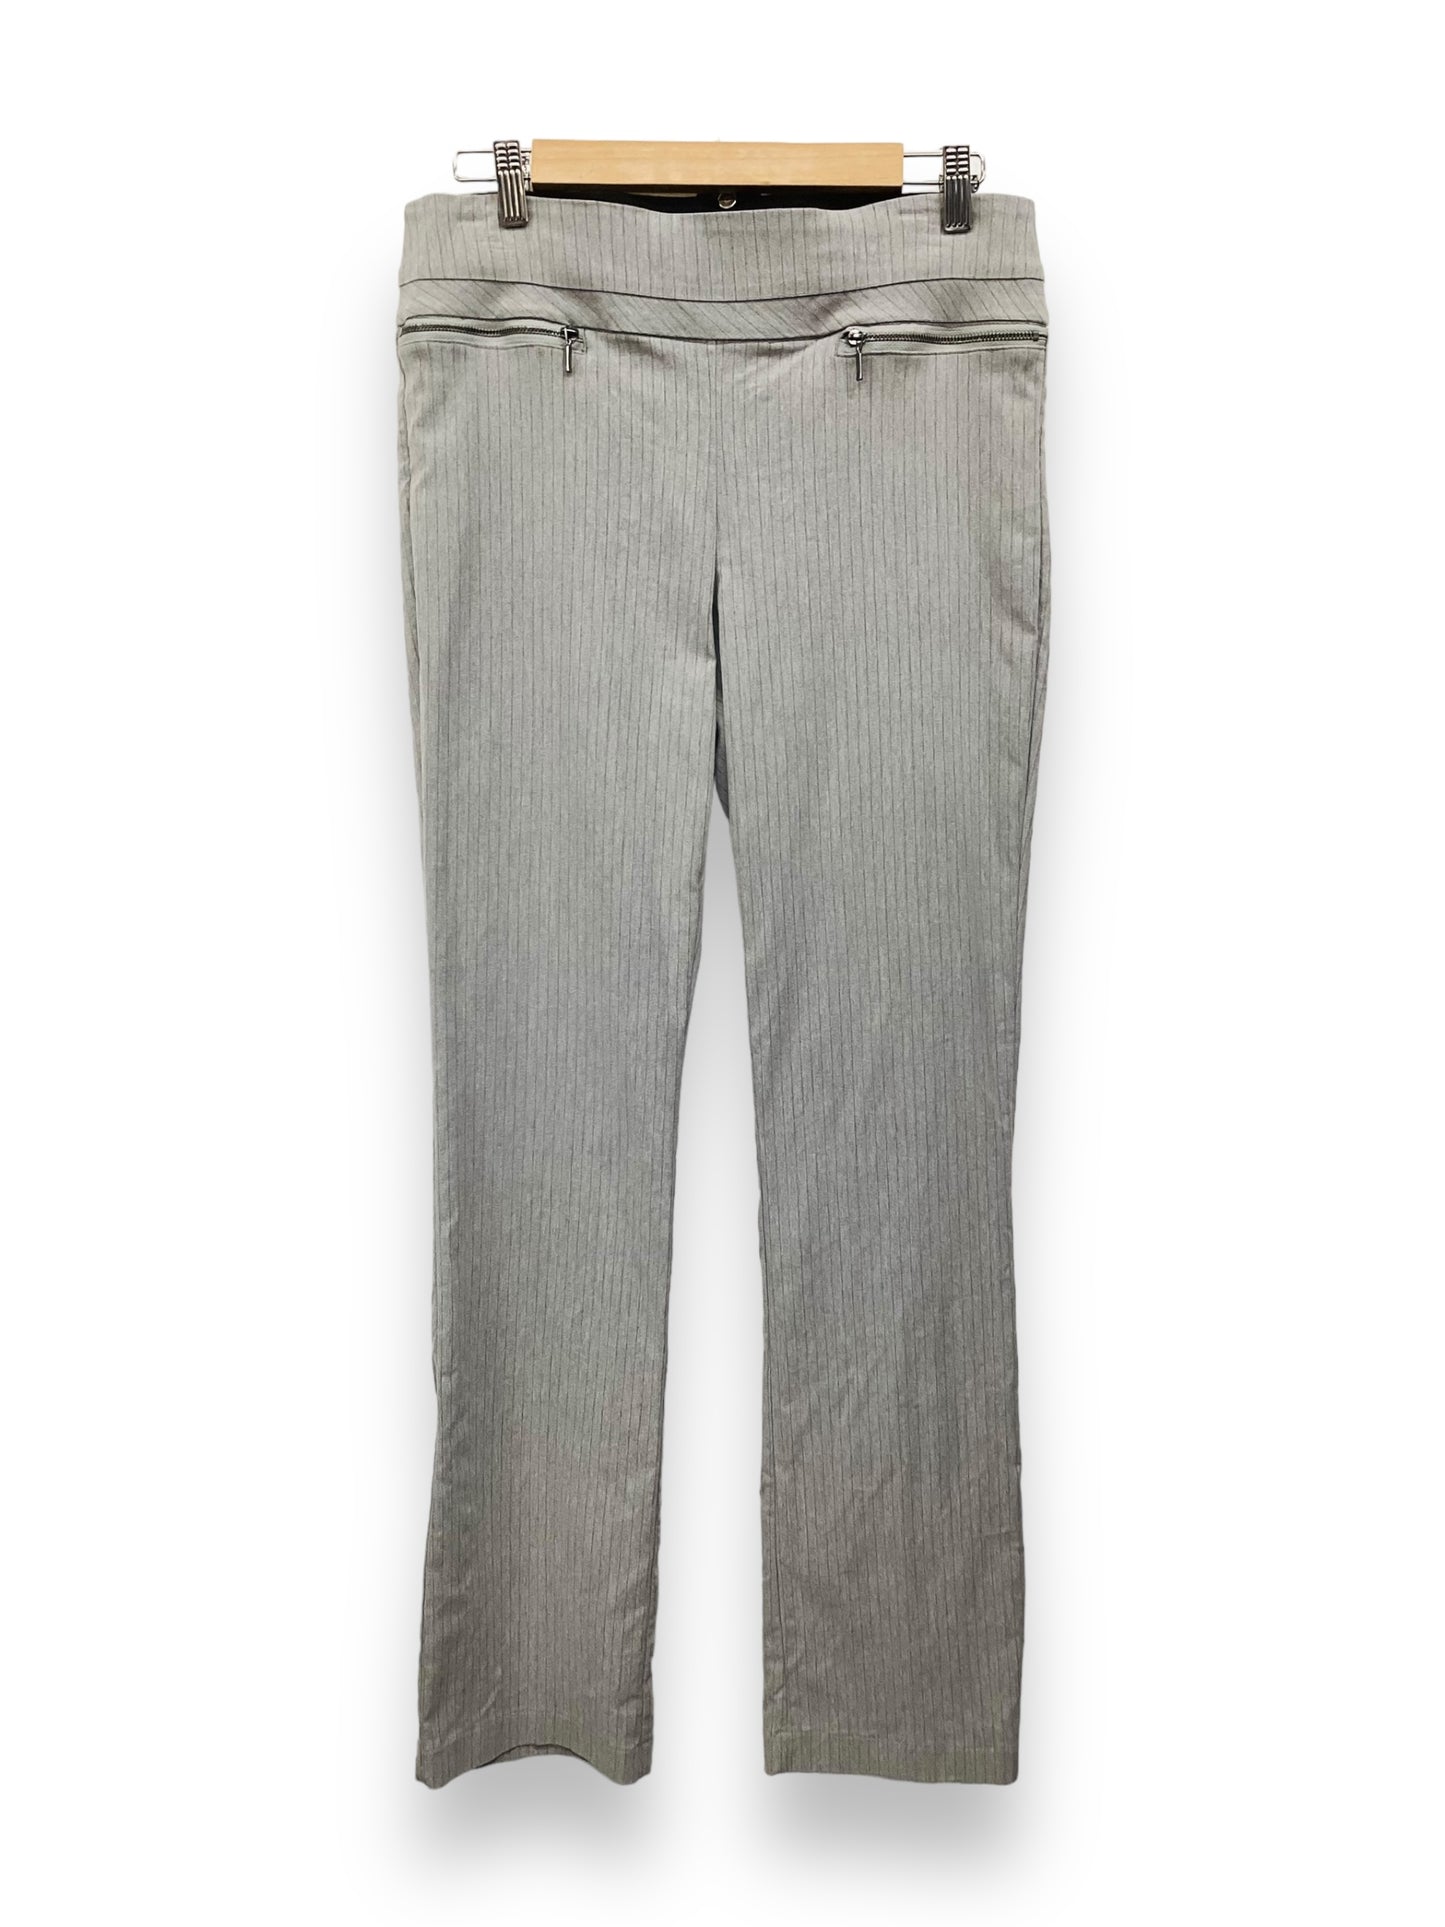 Pants Grey by Violets and Roses